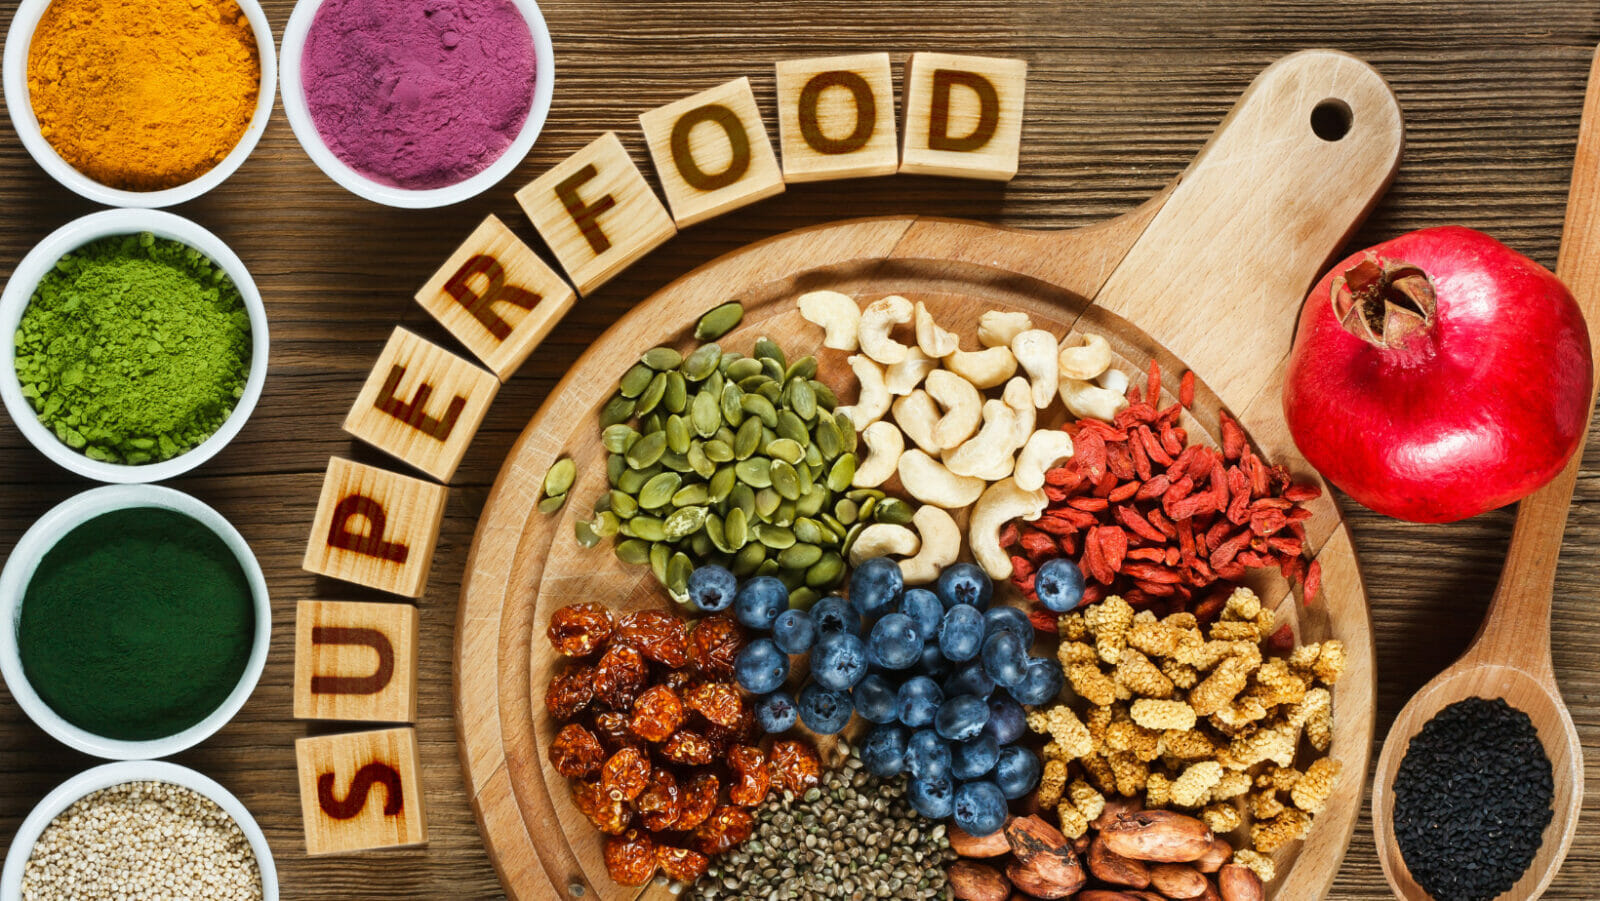 A photo of popular superfoods